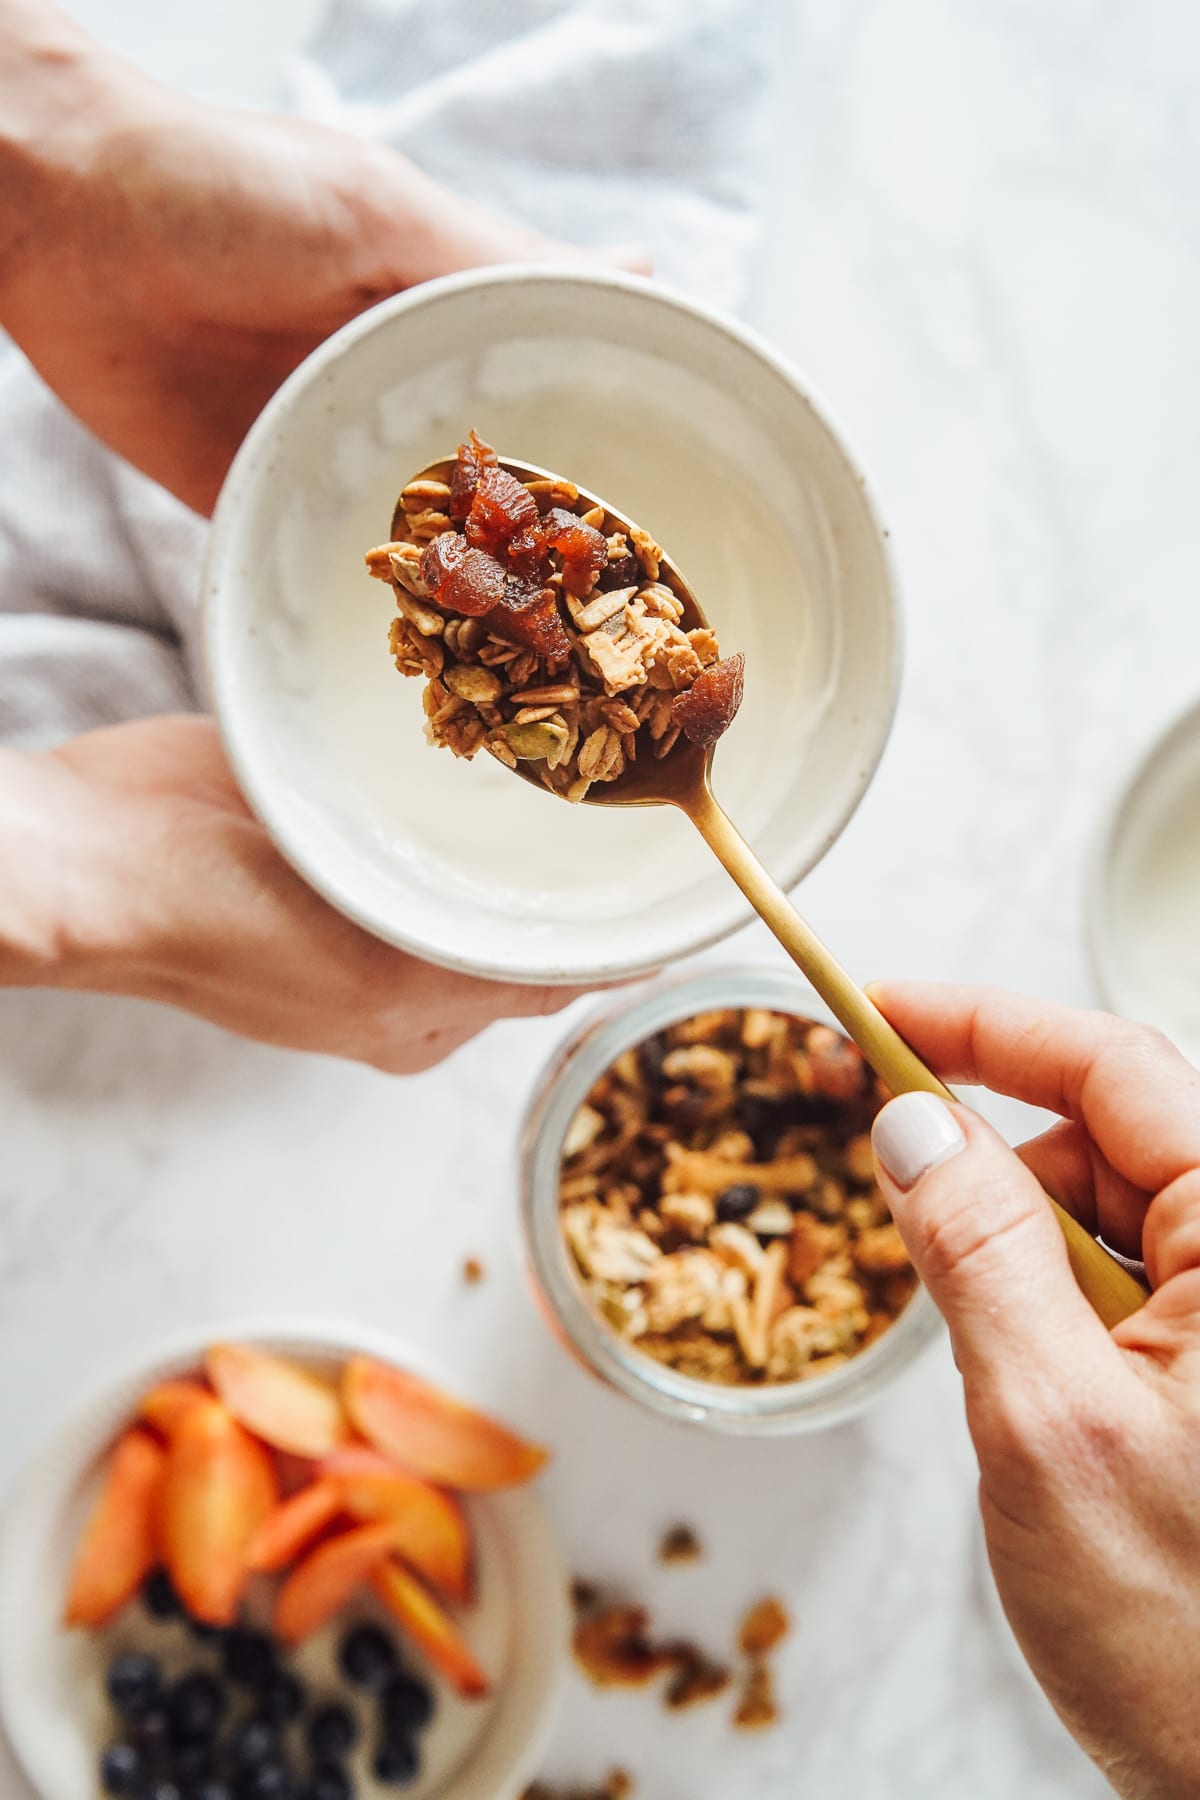 A homemade master granola recipe you can customize to make your own. Use the base recipe, and then choose any spice, dried fruit, or nuts/seeds desired.